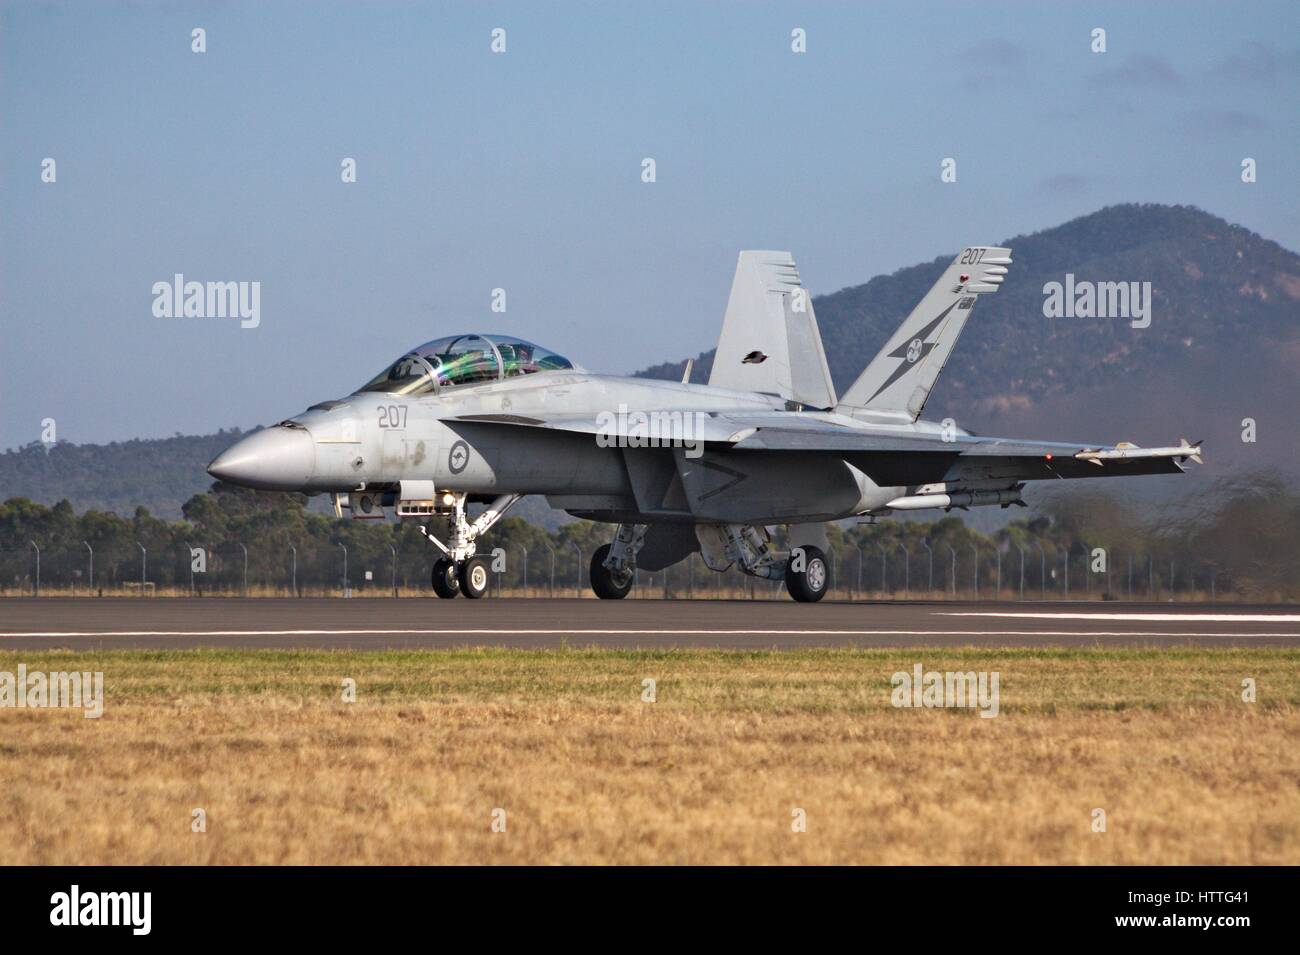 F/A-18F Super Hornet on the runway at the Avalon airshow, Melbourne, Australia, 2017. Stock Photo